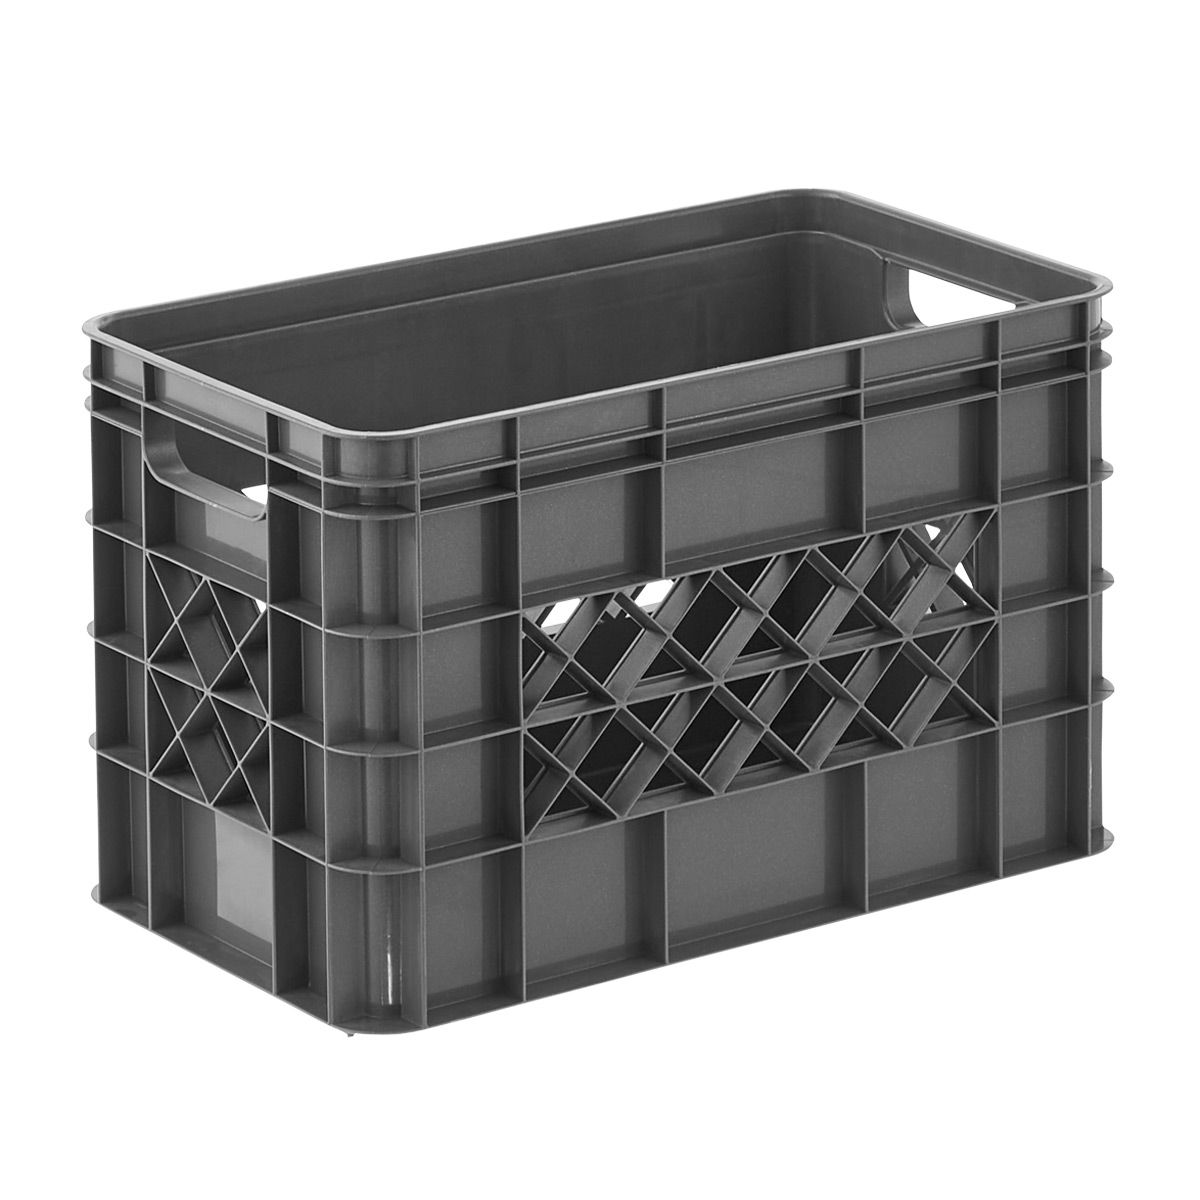 https://www.containerstore.com/catalogimages/420585/10069961_small_modular_stacking_crat.jpg